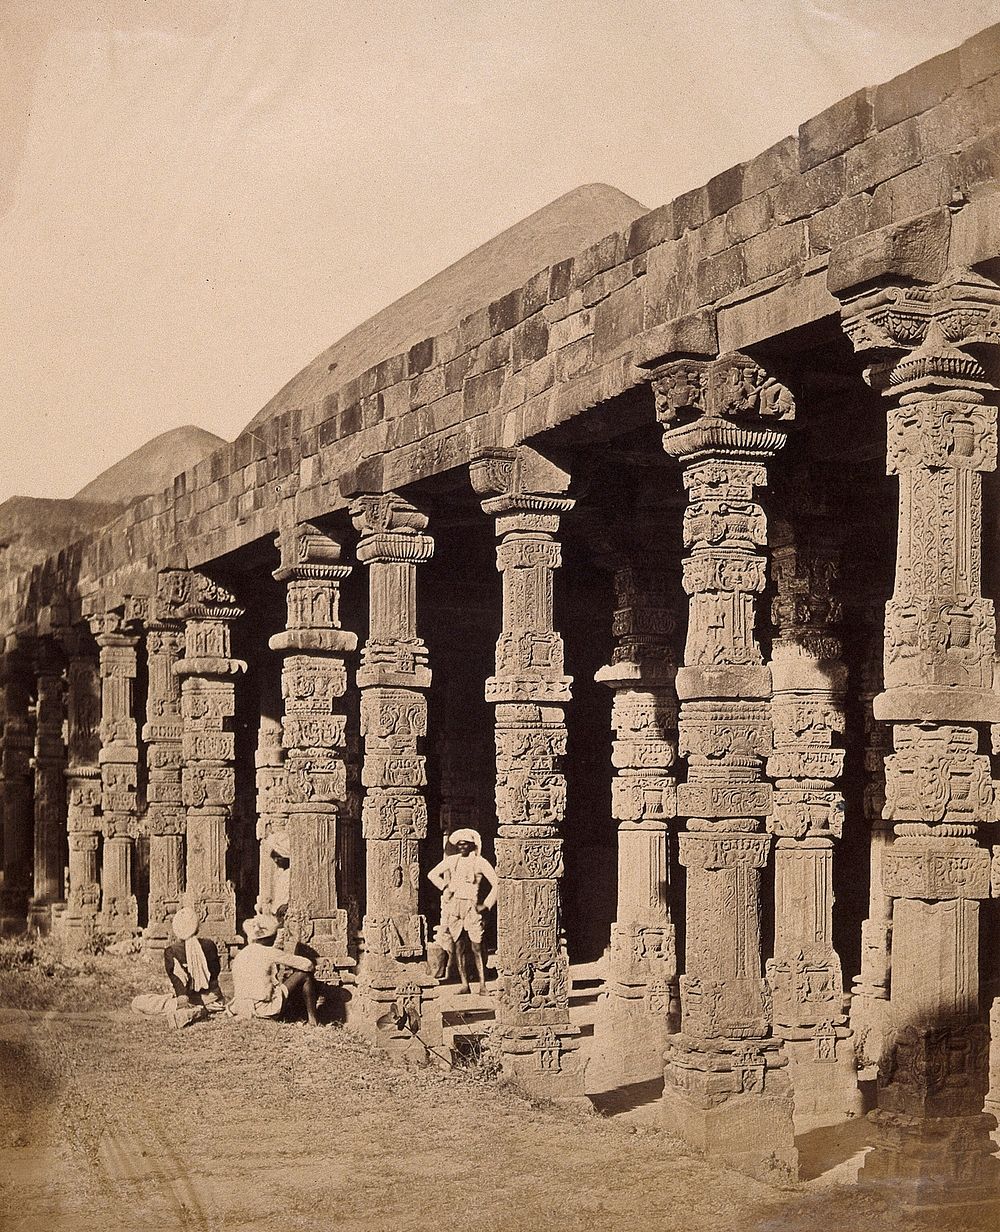 India: exterior of the Hindu temple in the Kootub near Delhi. Photograph by F. Beato, c. 1858.